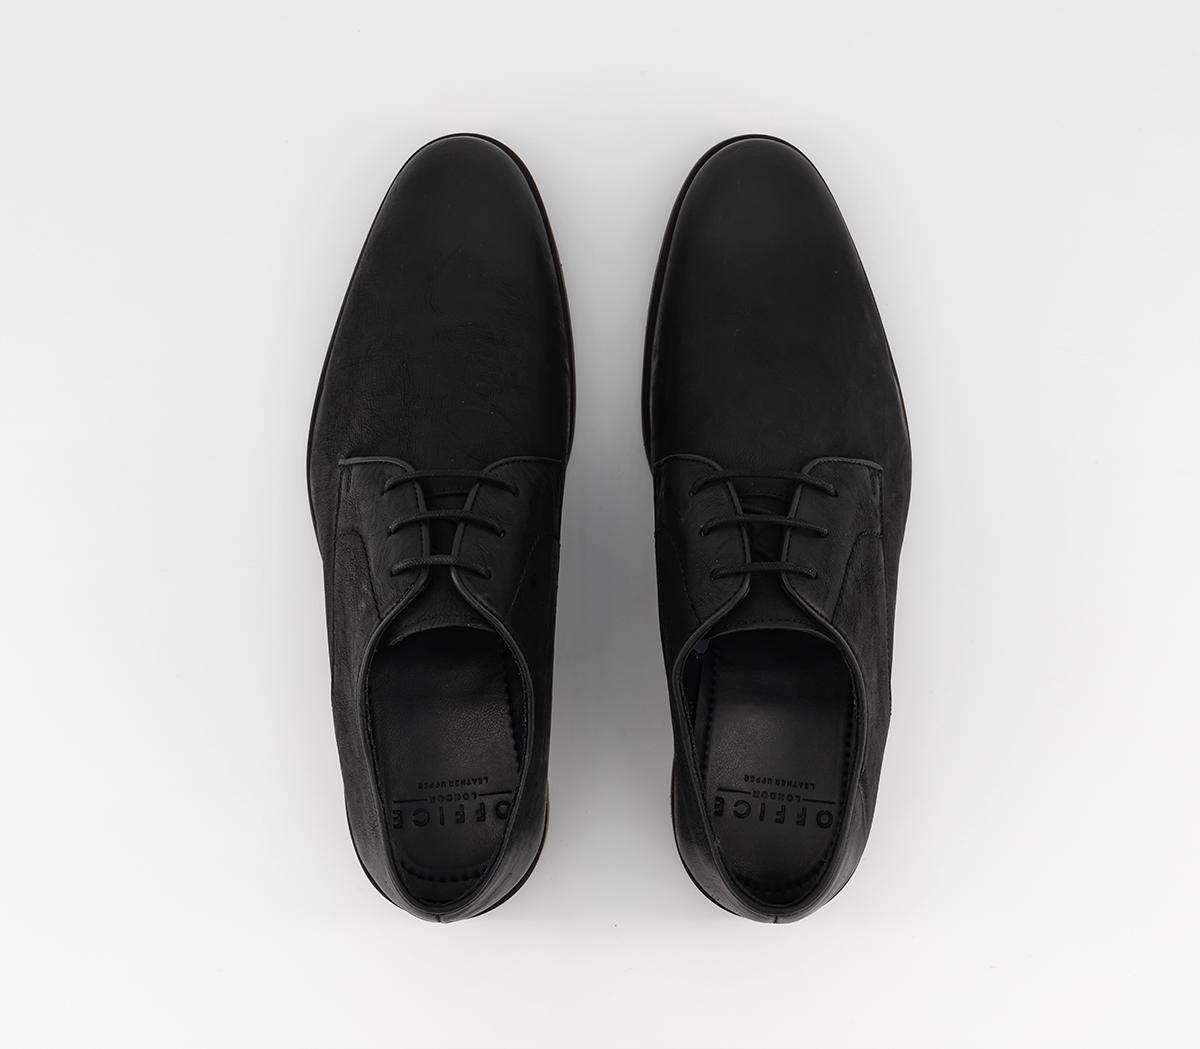 OFFICE Curtis Washed Leather Derby Shoes Black Leather - Men's Casual Shoes